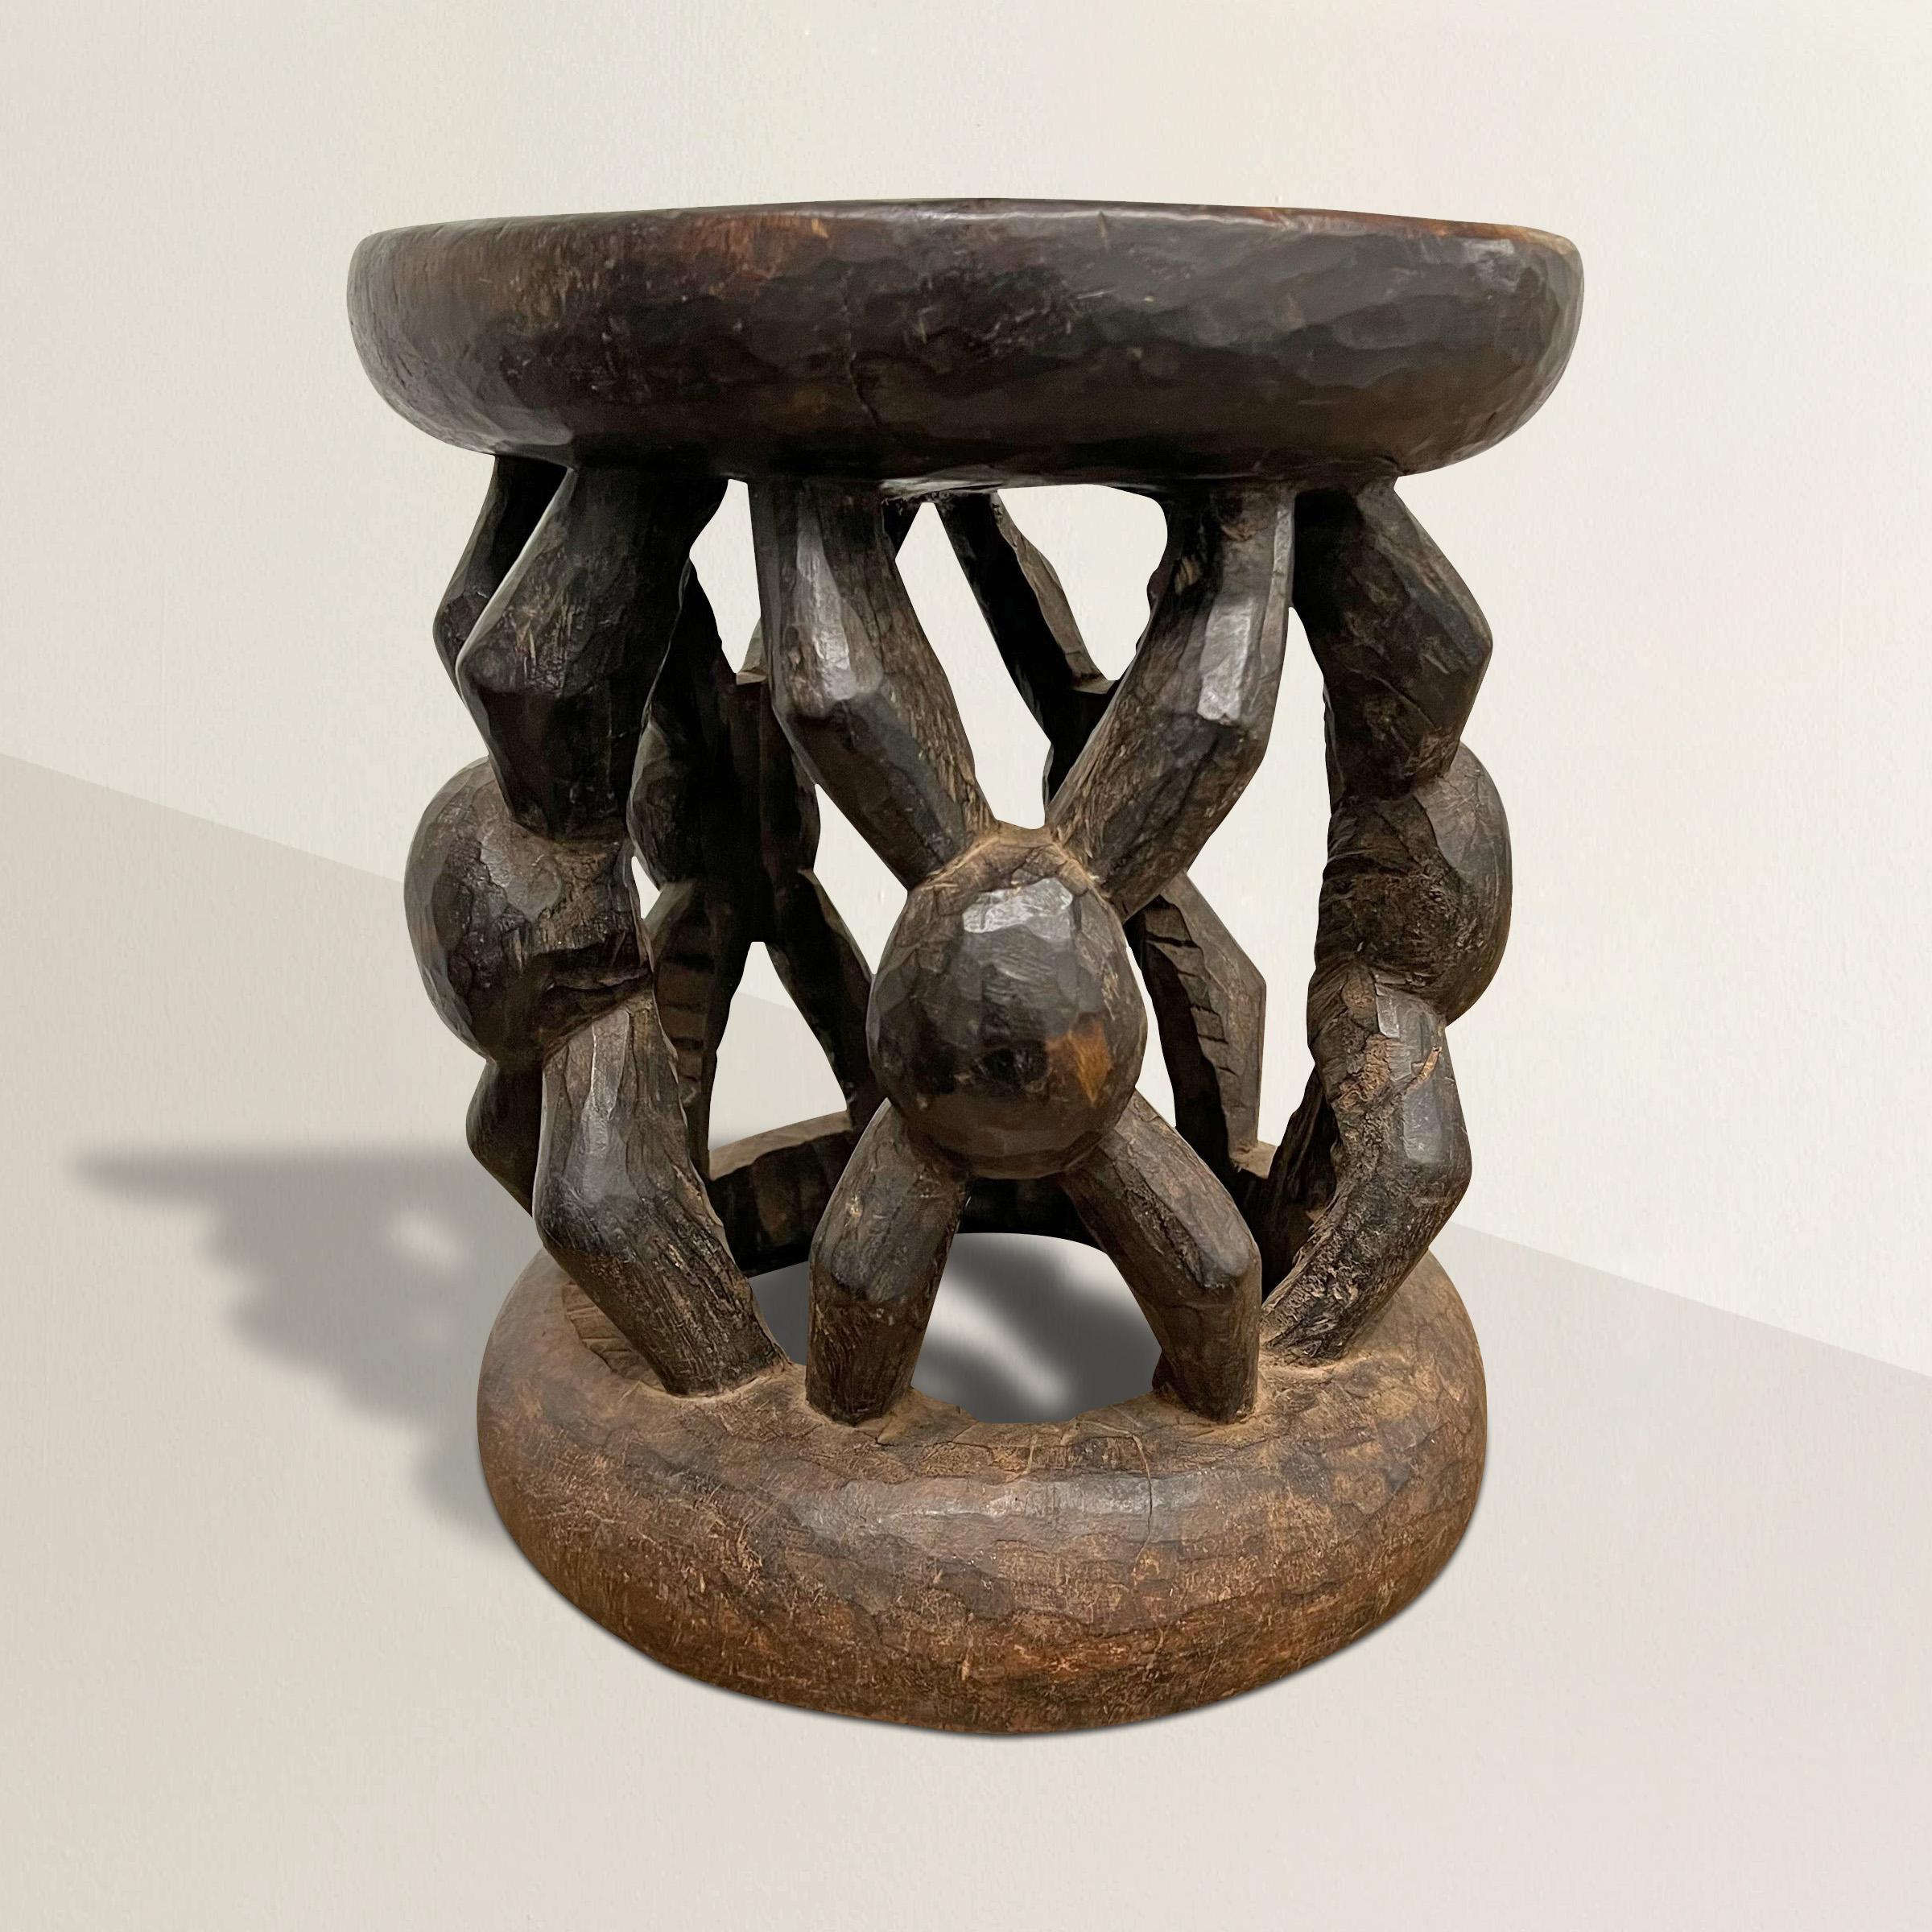 A bold and lively early 20th century Bamileke stool hand-carved of one piece of wood with a wonderful pattern depicting figures with outstretched arms and legs, and with the most beautiful patina that only time can bestow. The stool can also double